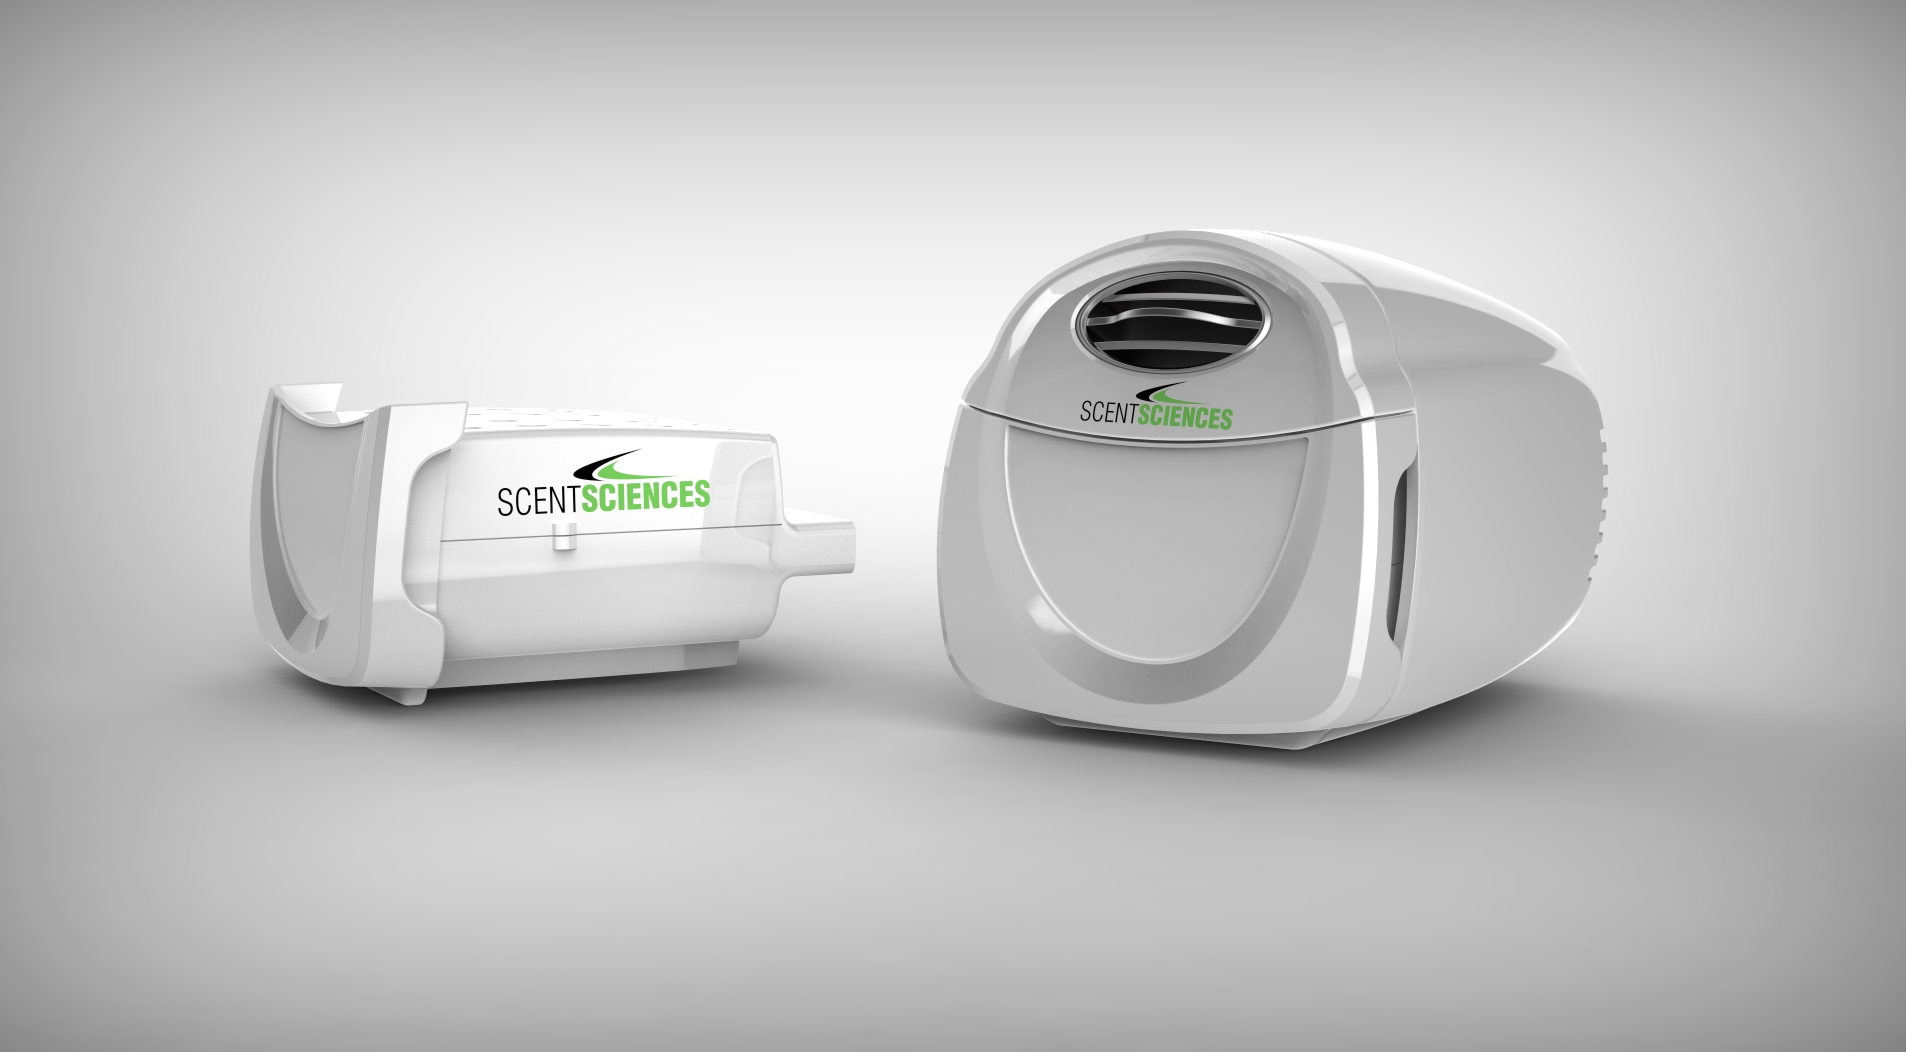 This is a photo of Scent Science Corporation's product, ScentScape, which digitally emits scents.